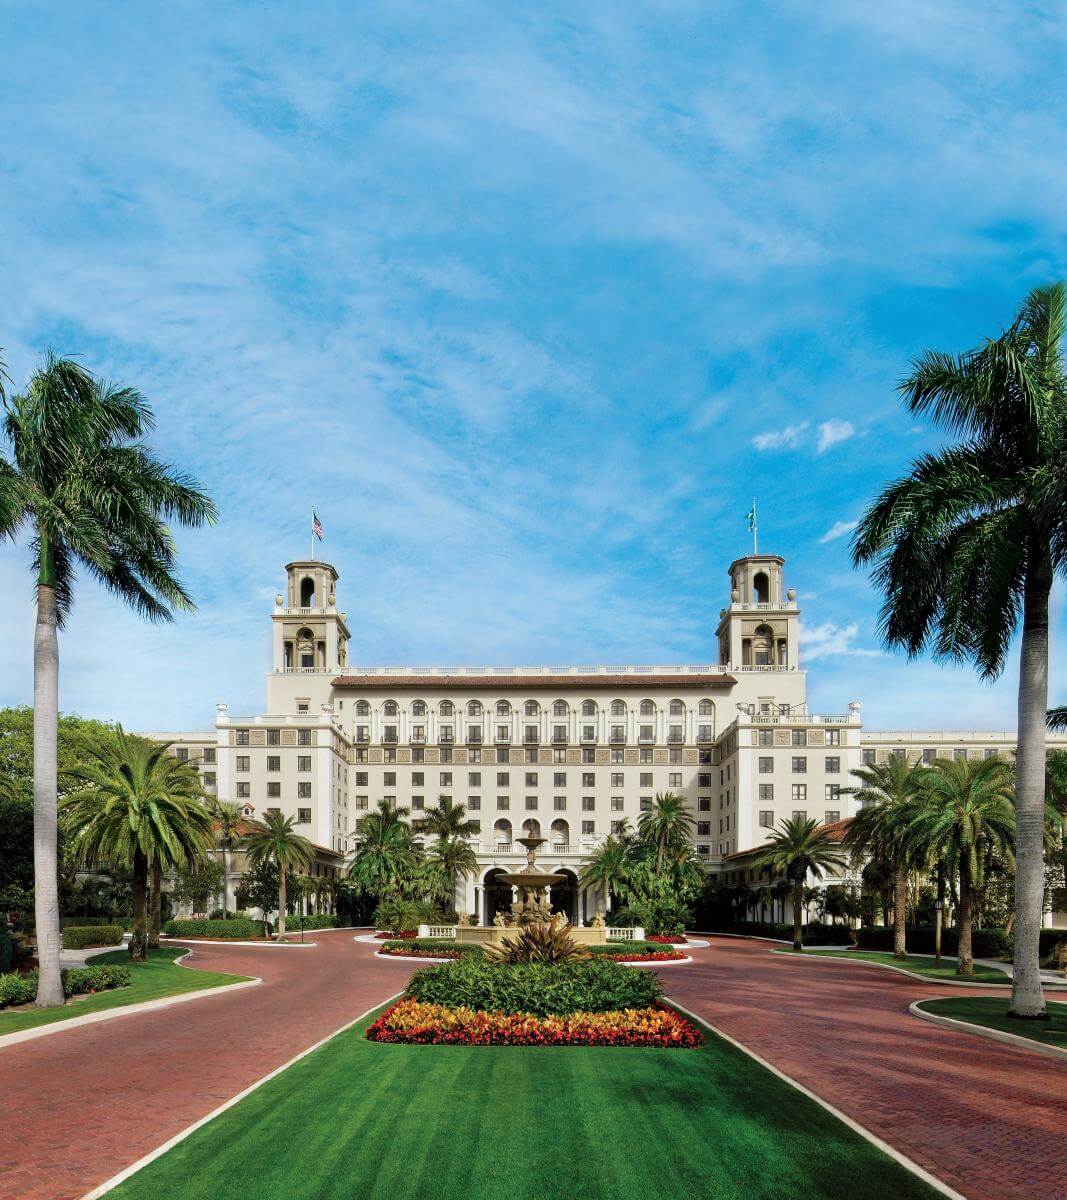 Main drive of The Breakers Palm Beach hotel